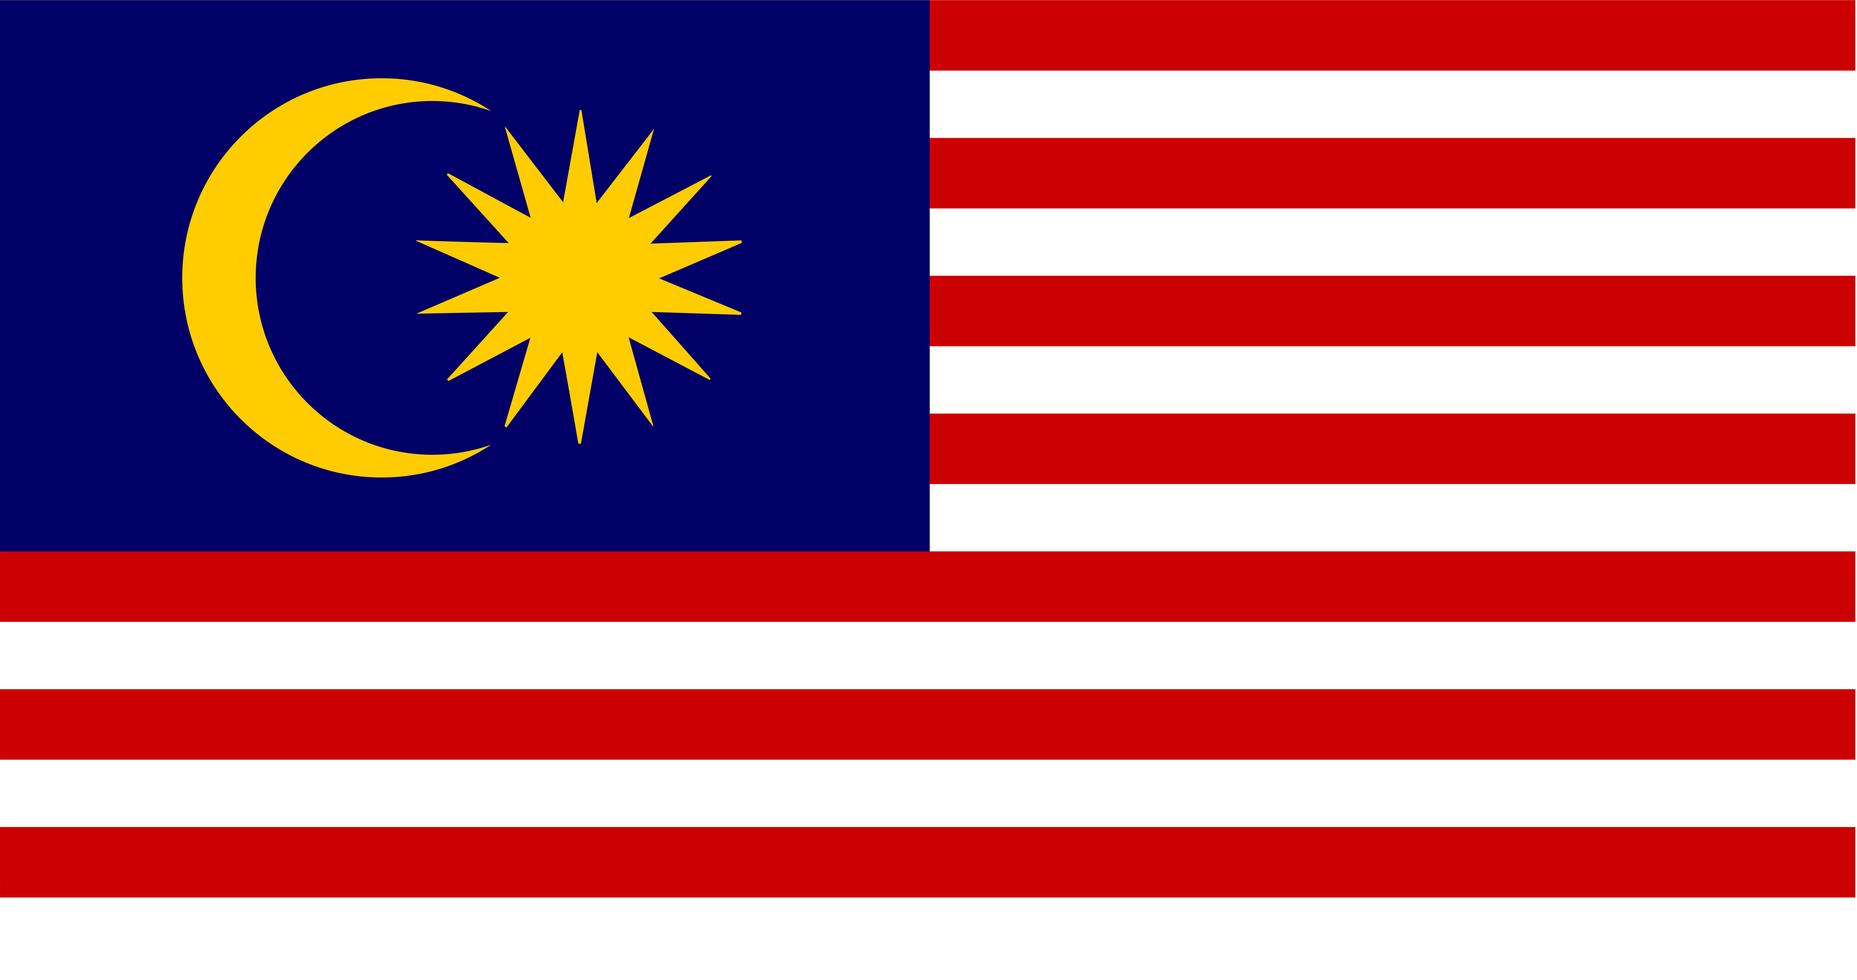 Illustration of Malaysia flag  Download Free Vectors, Clipart Graphics